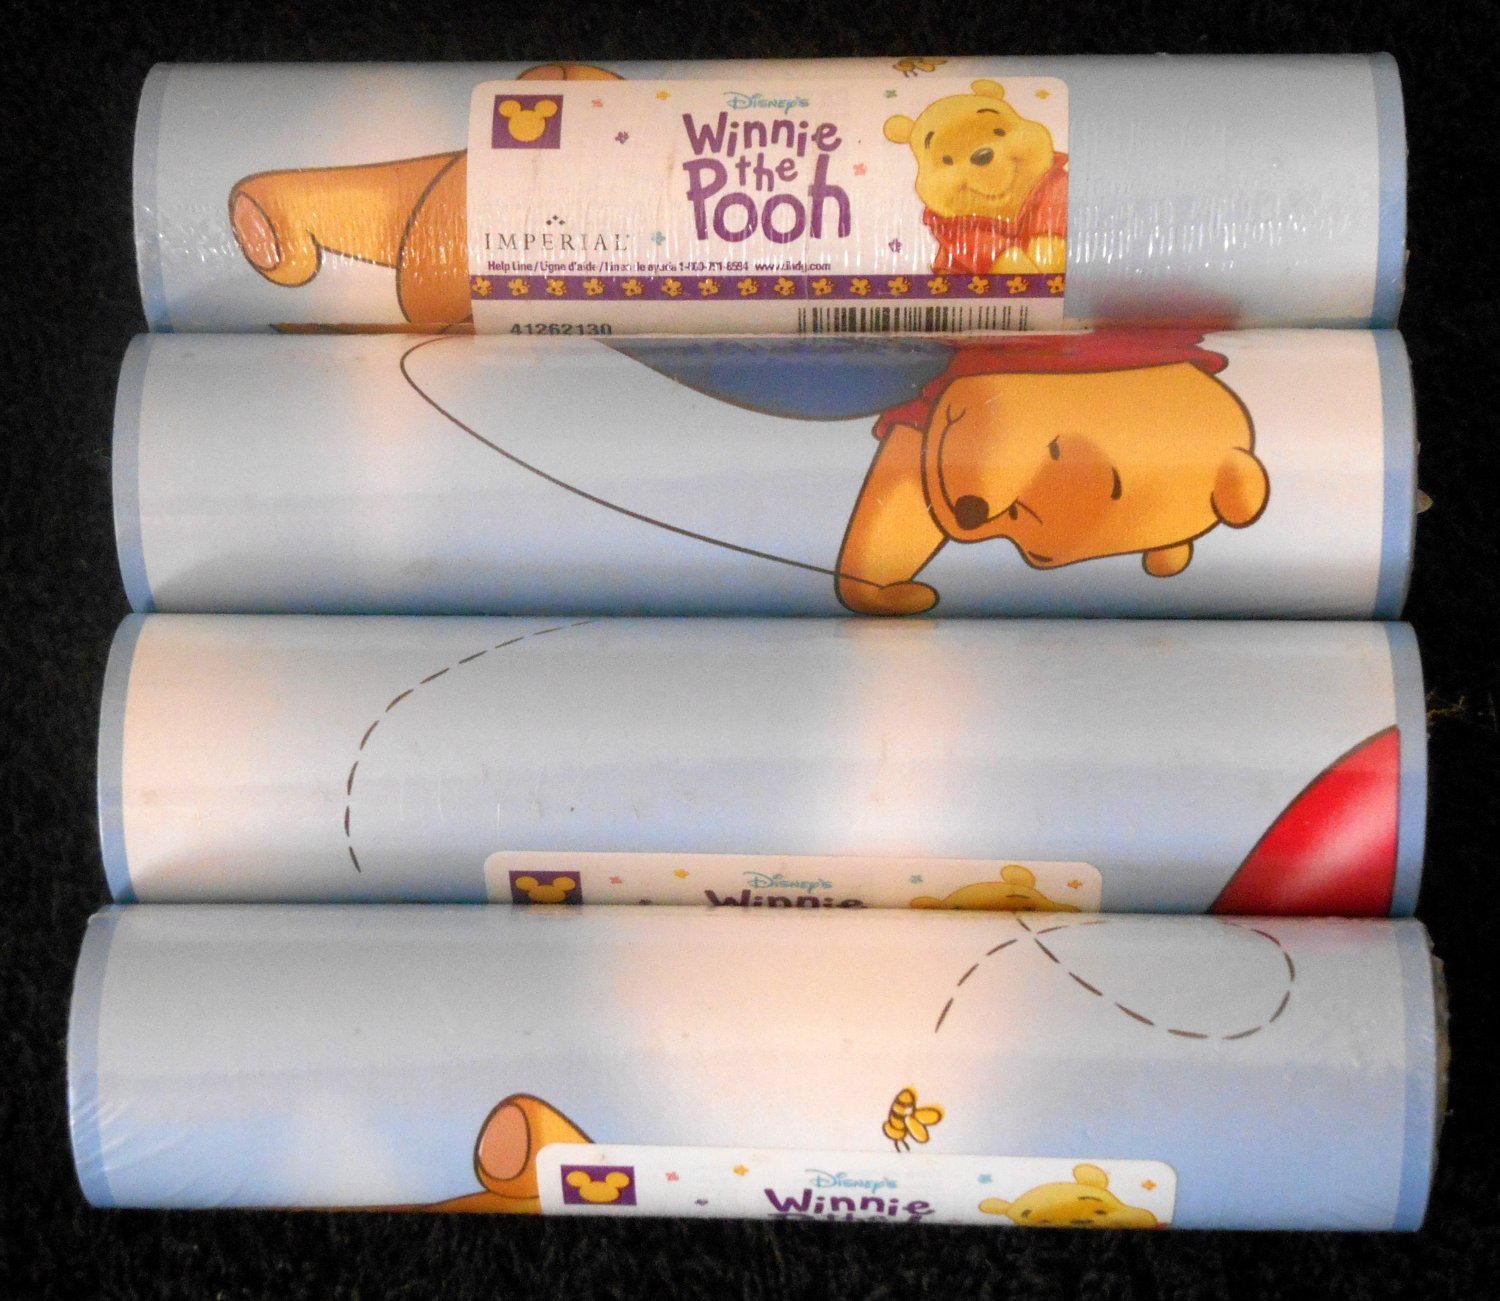 Winnie the Pooh Wall Border Edging Blue Balloons Bees 4 Rolls 20 Yards 60 Feet Imperial Prepasted